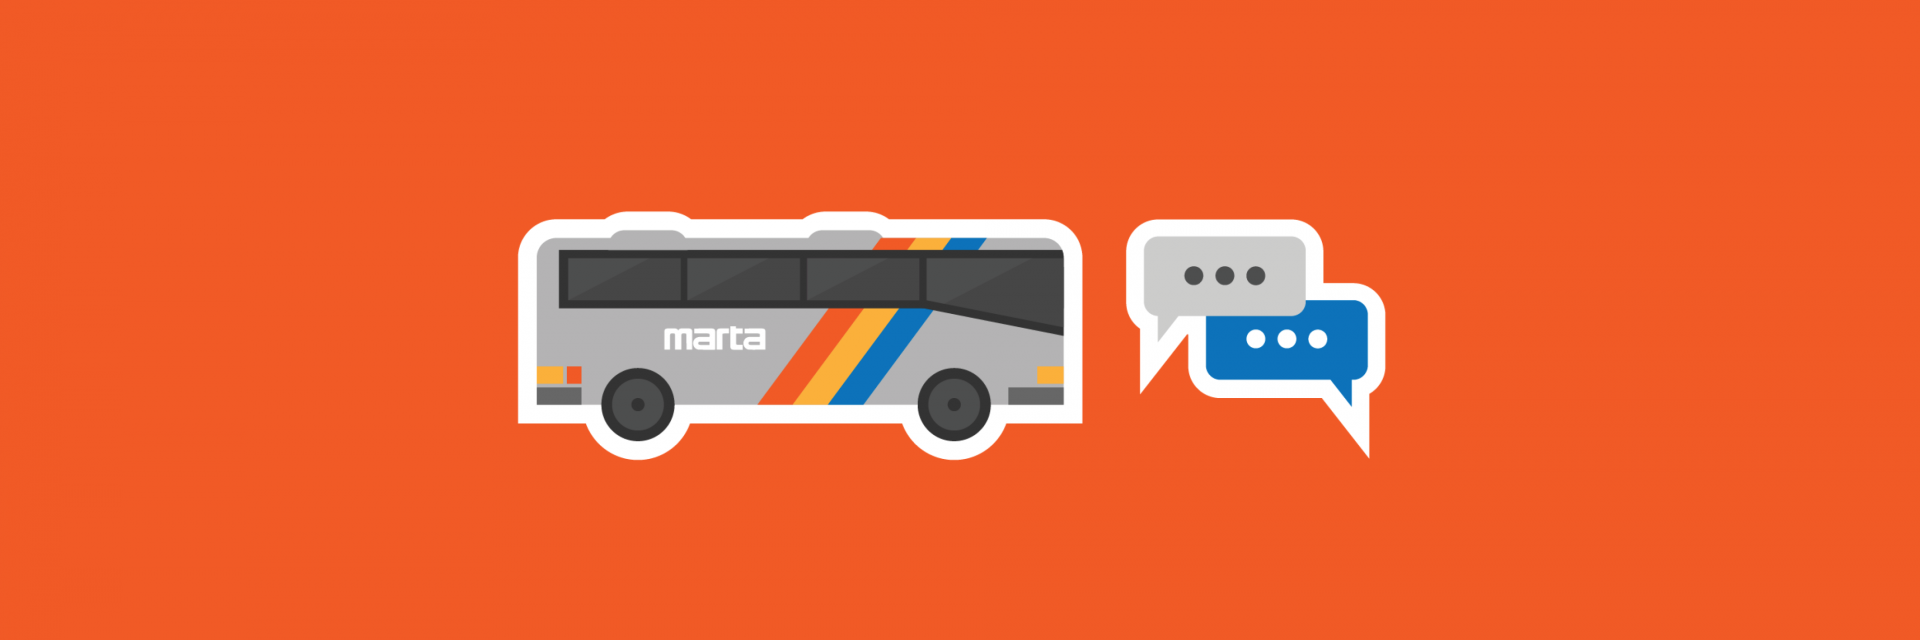 a graphic showing a marta bus with messaging icons